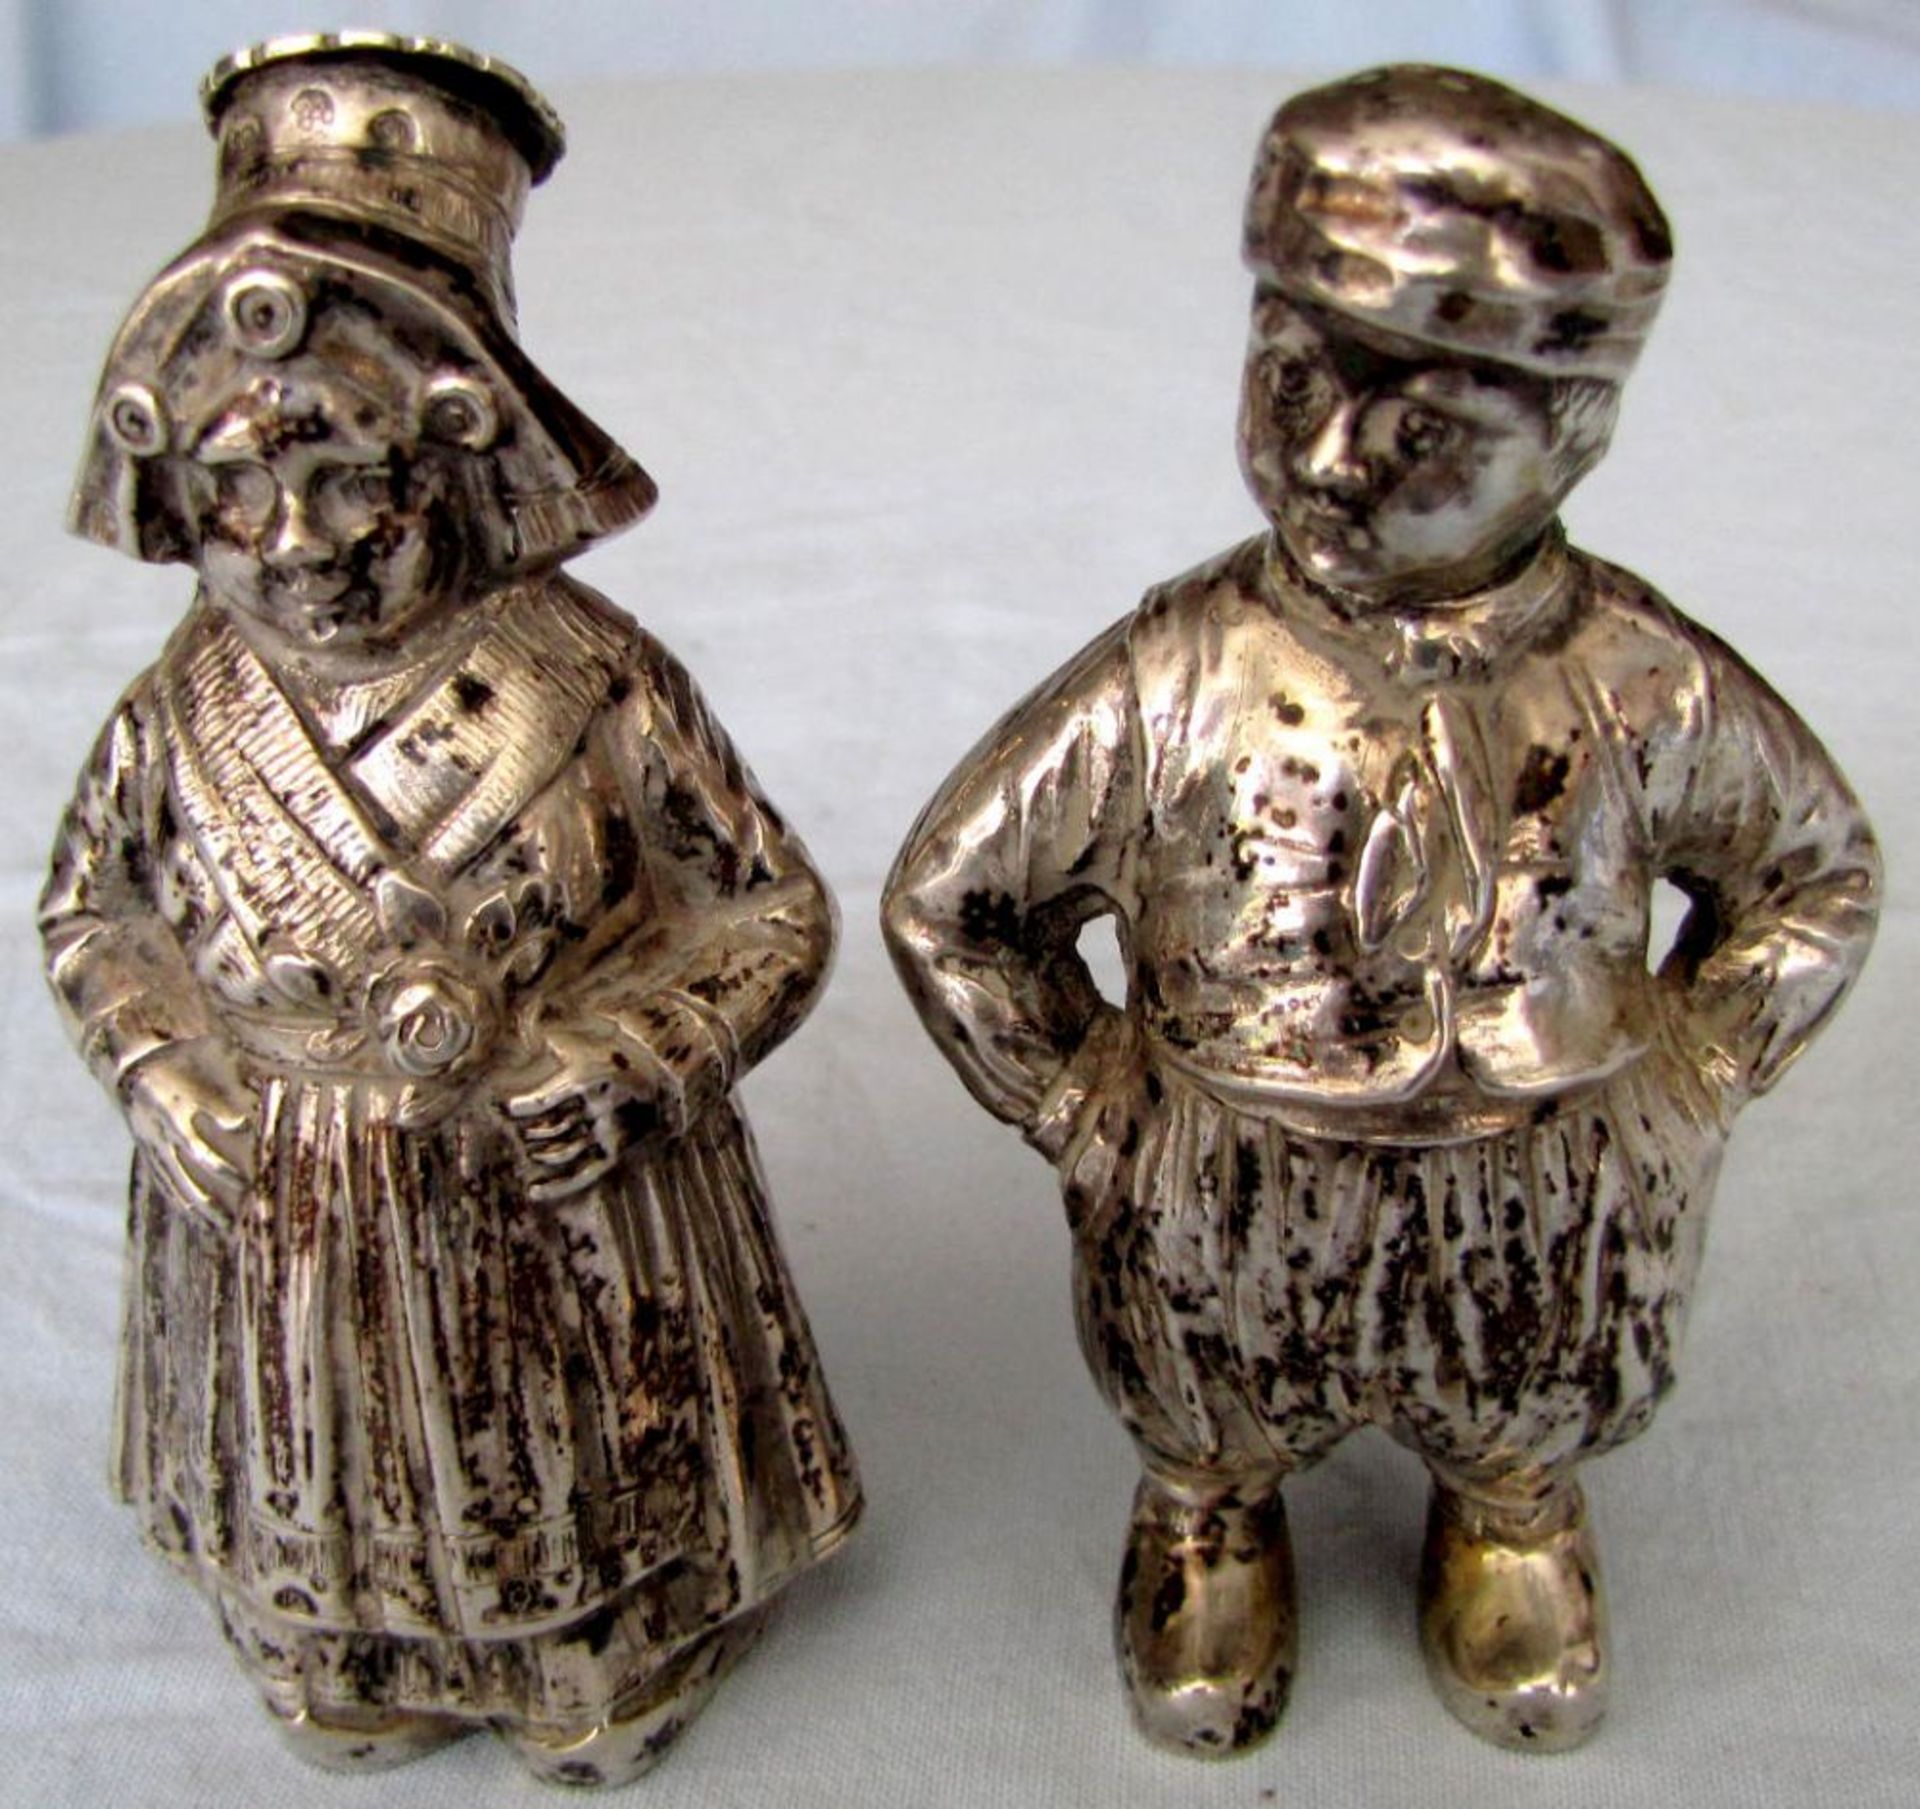 A Pair of Salt and Pepper Shakers, Proably Flanders. Old.  Up to 10.5 cm high. 169 grams gross. In